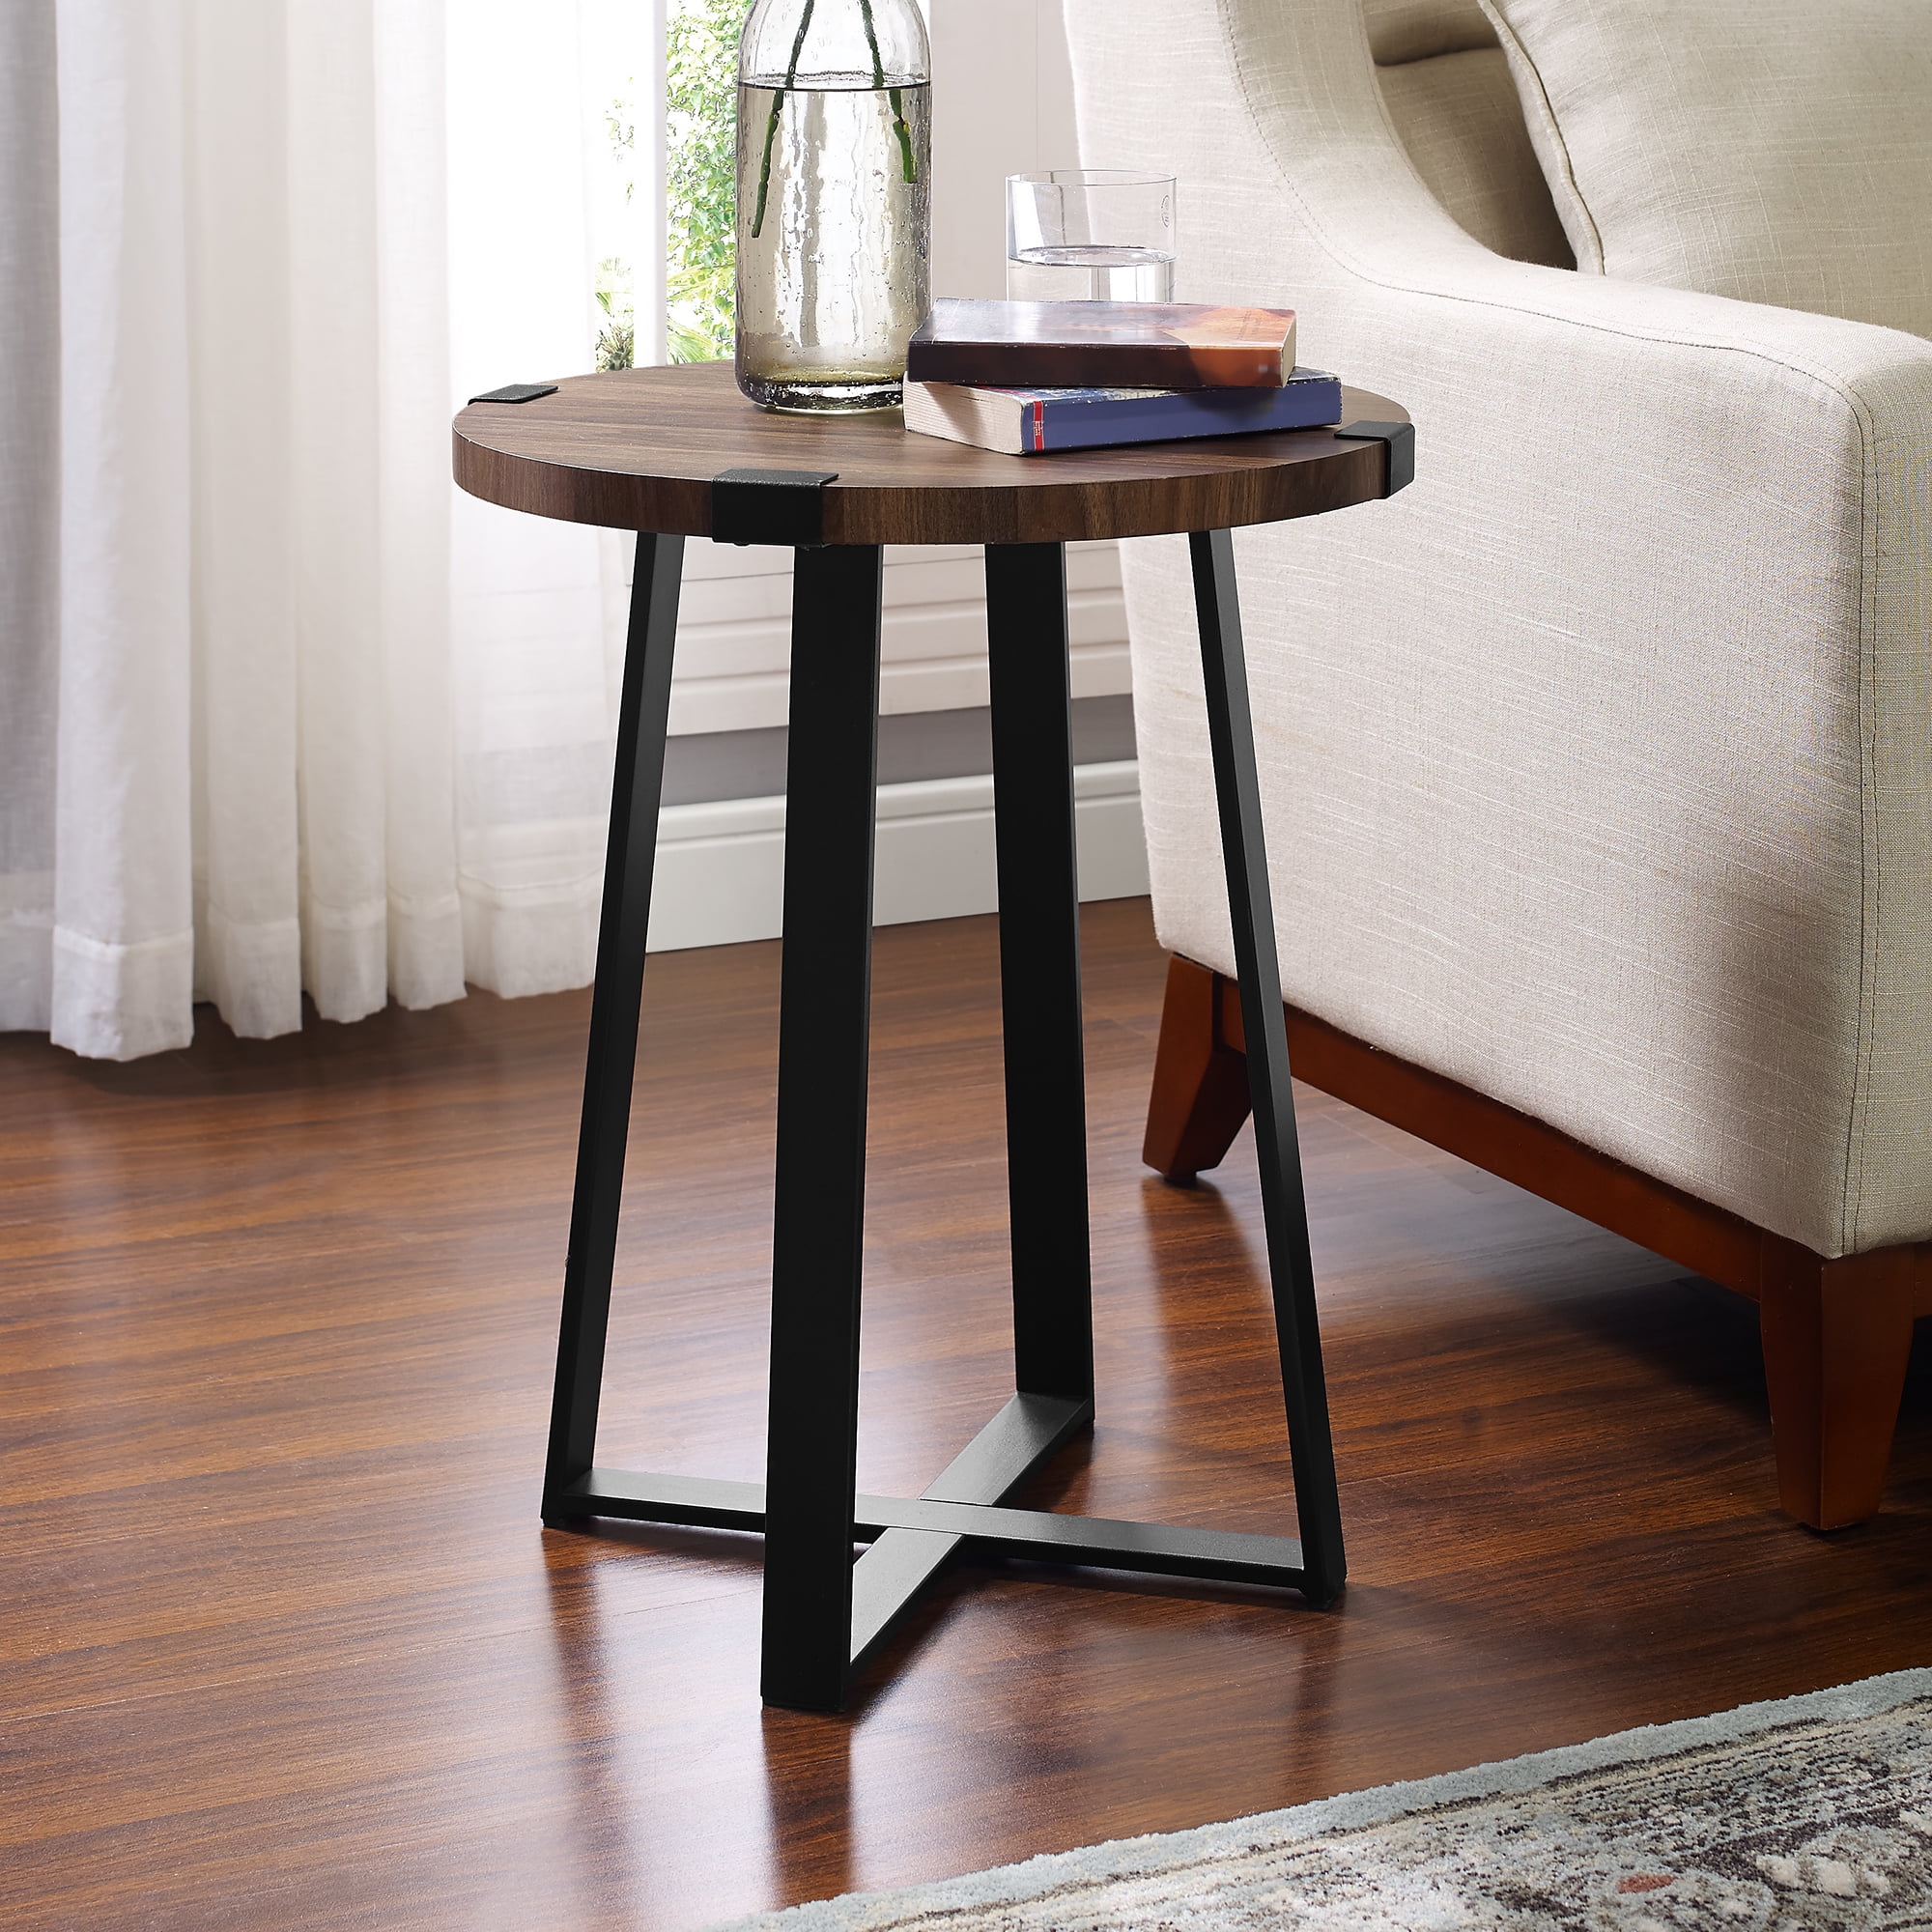 Small round side table for living room - Lasicam